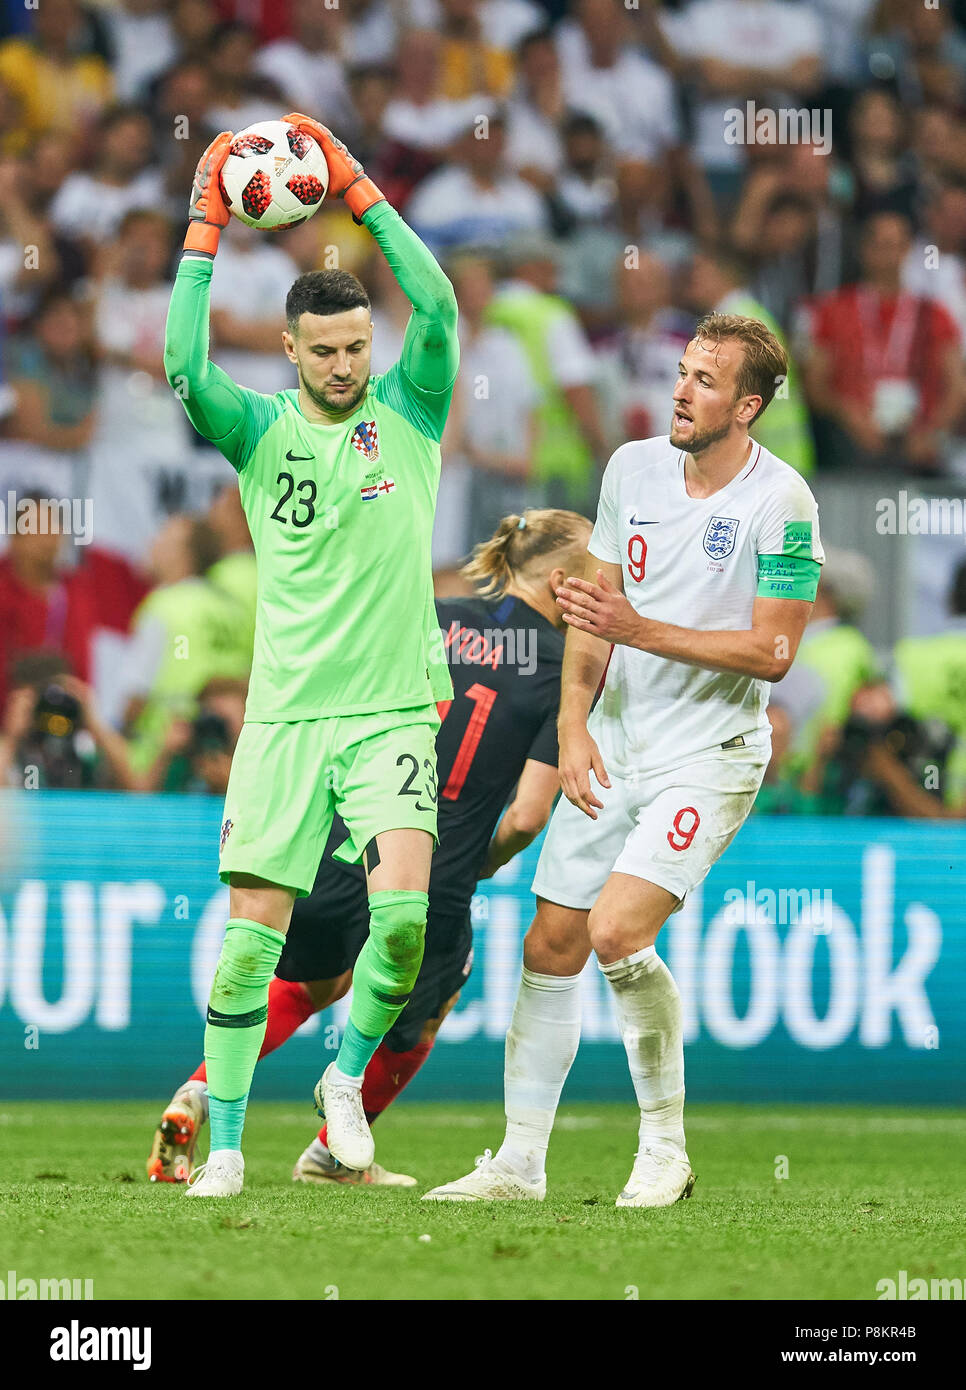 England - Croatia, Soccer, Moscow, July 11, 2018 Daniel SUBASIC, Croatia Nr.23  compete for the ball, tackling, duel, header against Harry KANE, England 9   ENGLAND  - CROATIA 1-2 Football FIFA WORLD CUP 2018 RUSSIA, Semifinal, Season 2018/2019,  July 11, 2018 in Moscow, Russia. © Peter Schatz / Alamy Live News Stock Photo